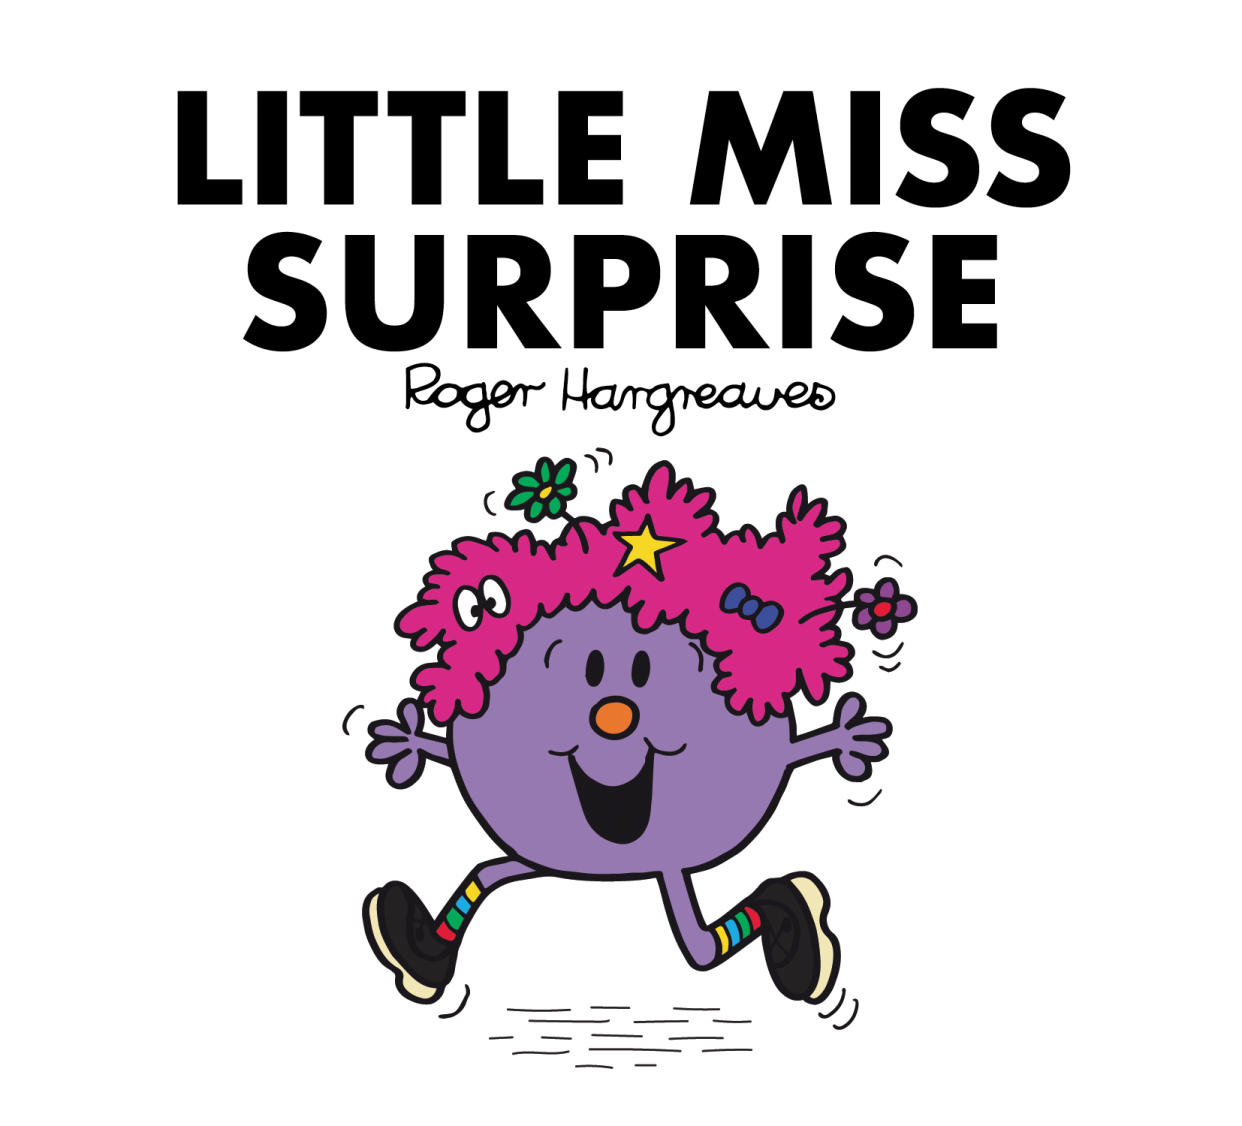 Little Miss Surprise has been added to the popular children’s books series (Farshore/PA)